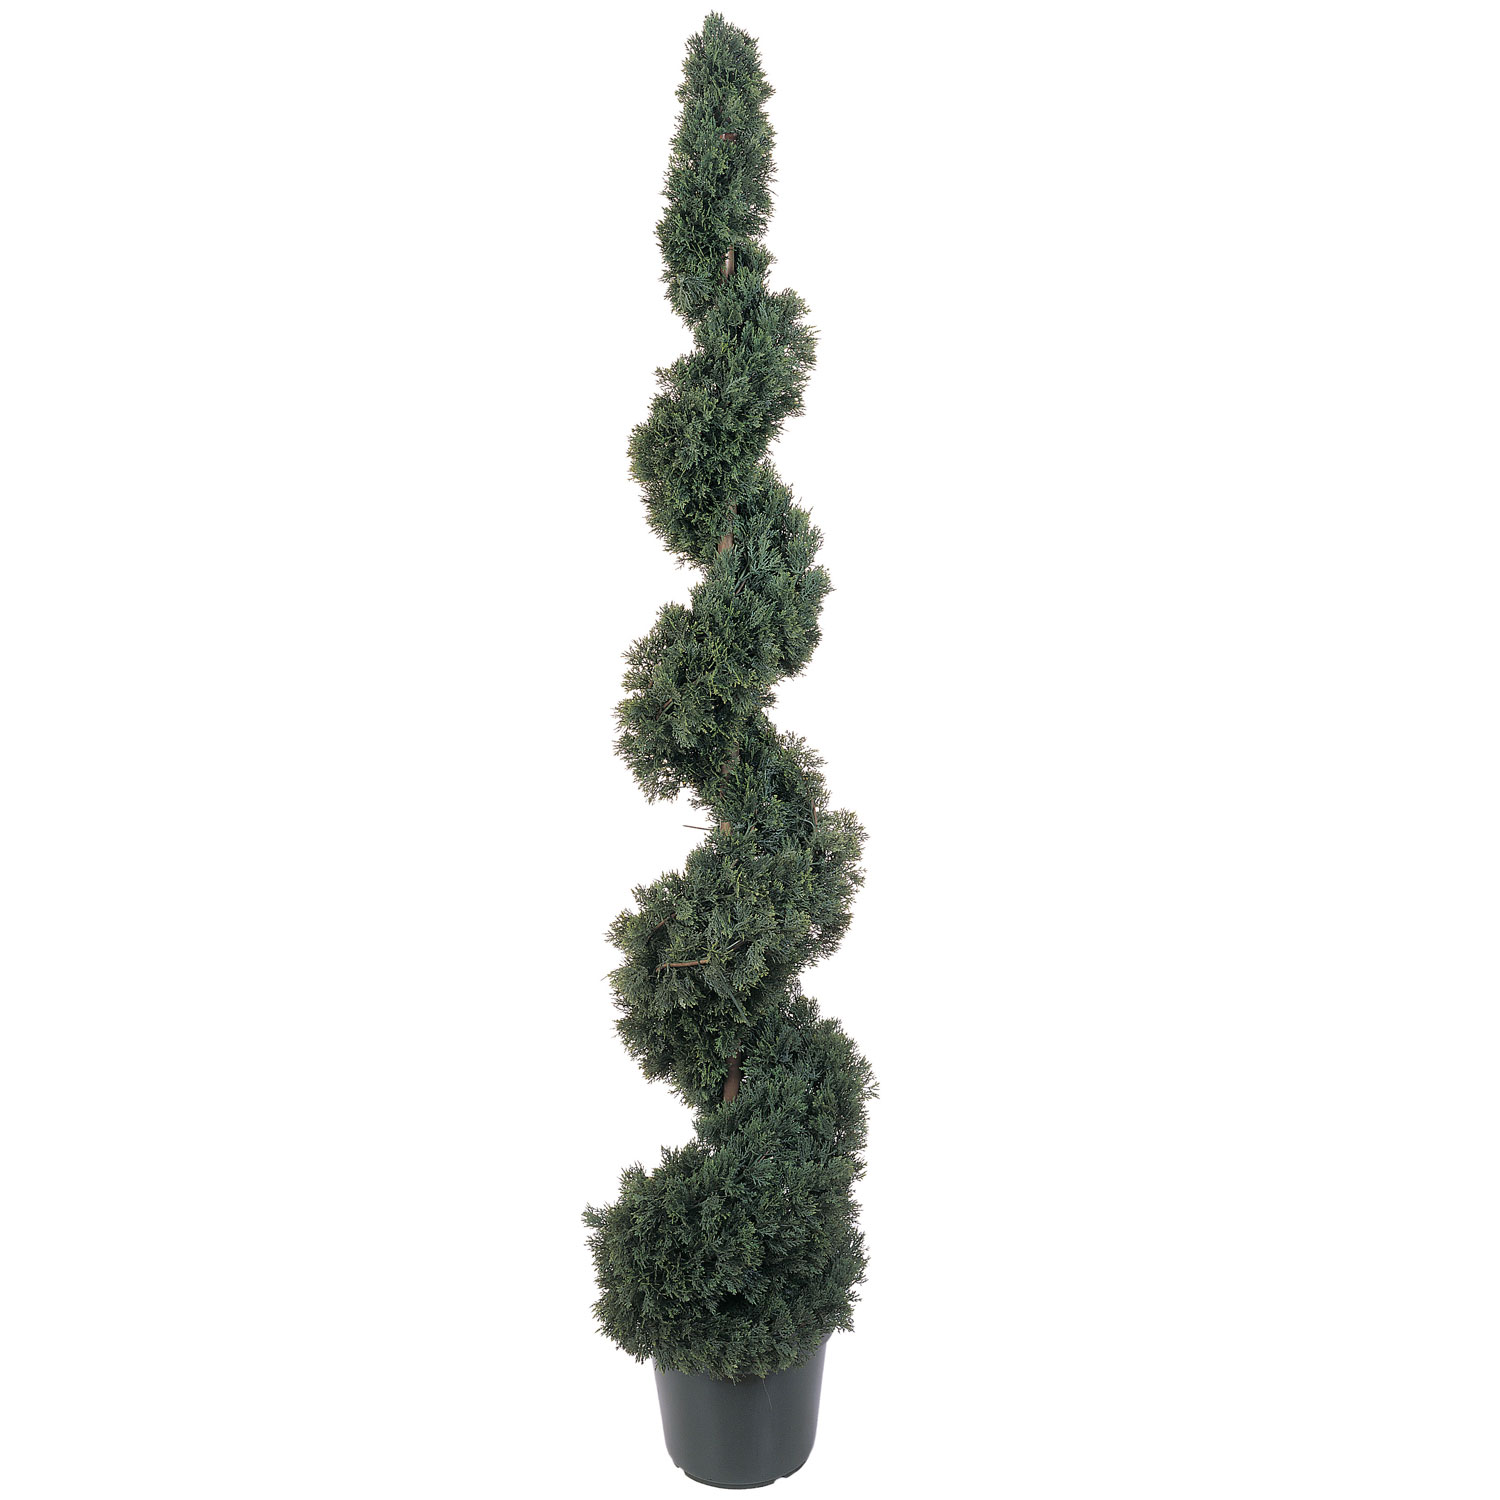 5 Foot Cedar Spiral Topiary: Potted